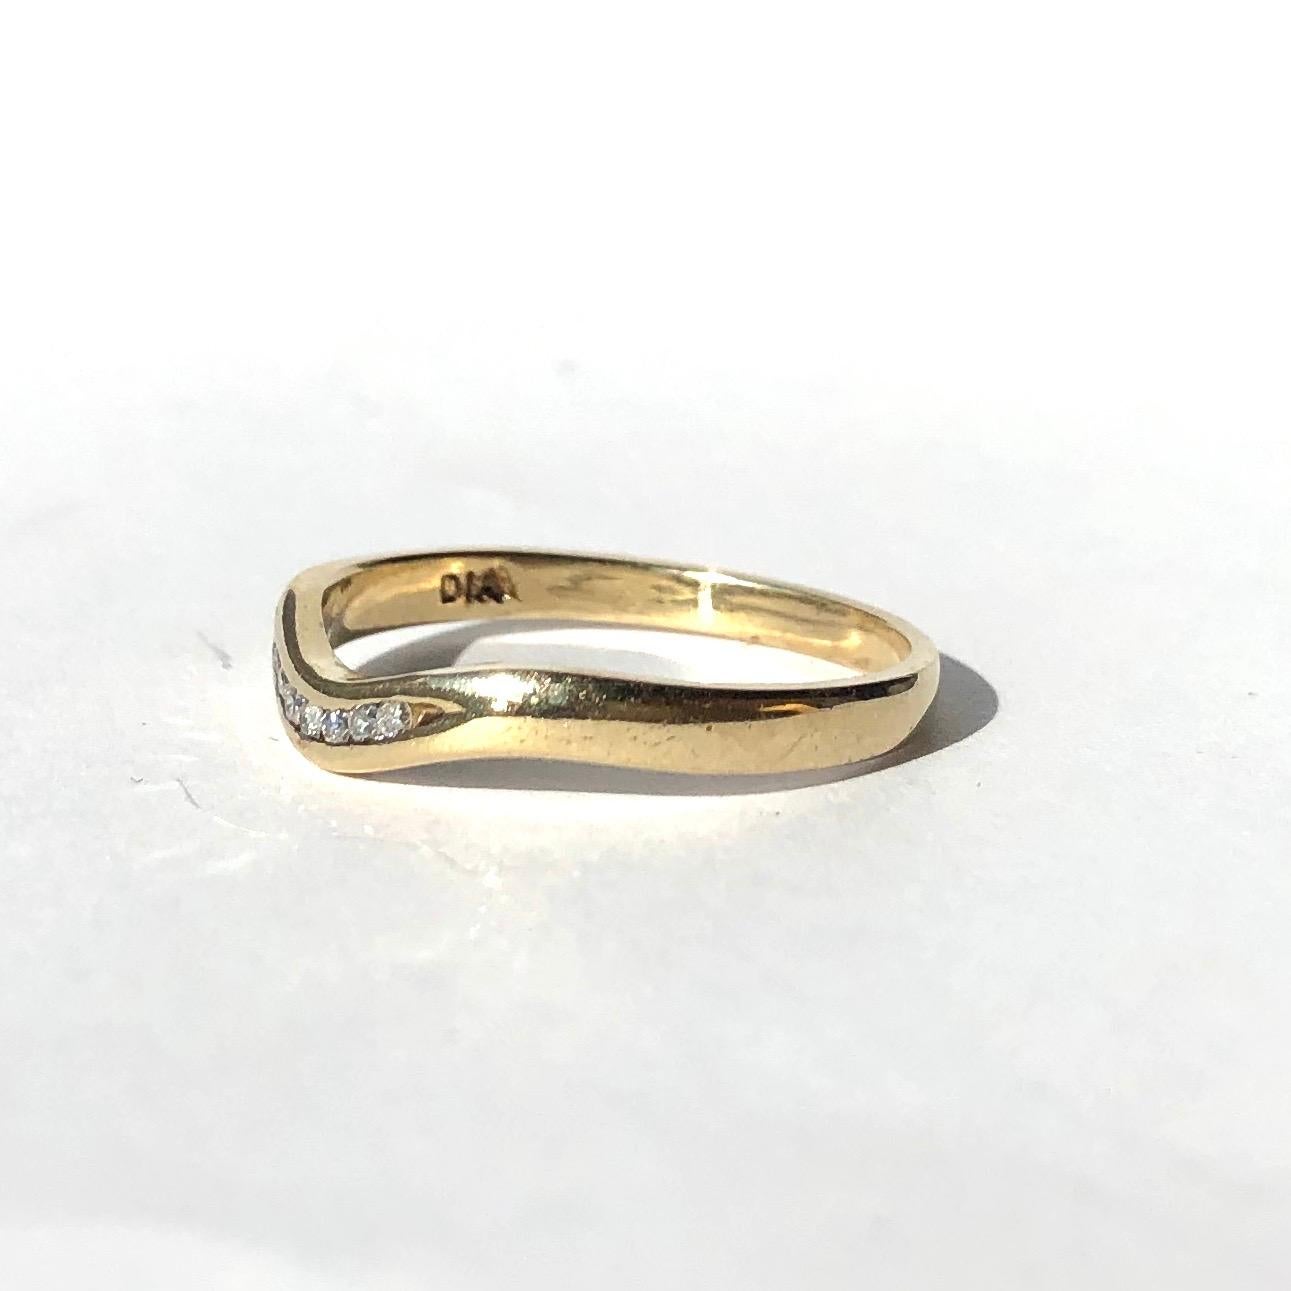 Seven small yet glistening diamonds sit within this 9ct gold band. The stones each measure 1pt and the band has a very subtle 'V' shape to it where the diamonds are set. Made in Birmingham, England. 

Ring Size: P 1/2 or 7 3/4 
Band Width: 2.5mm